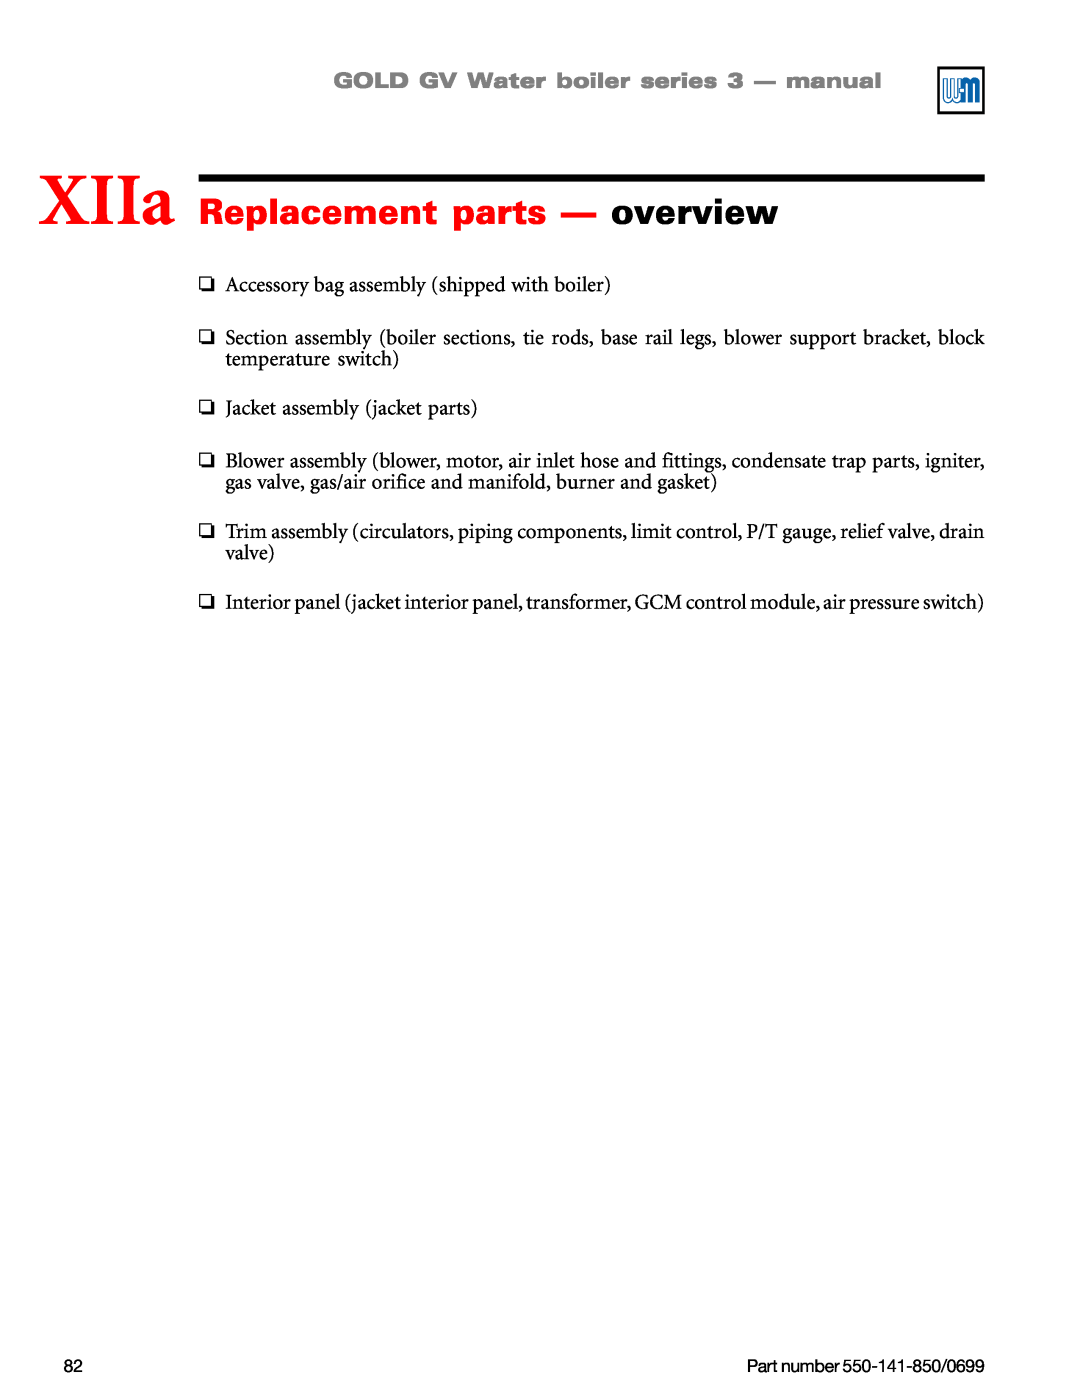 Weil-McLain GOLD DV WATER BOILER XIIa Replacement parts - overview, GOLD GV Water boiler series 3 — manual 